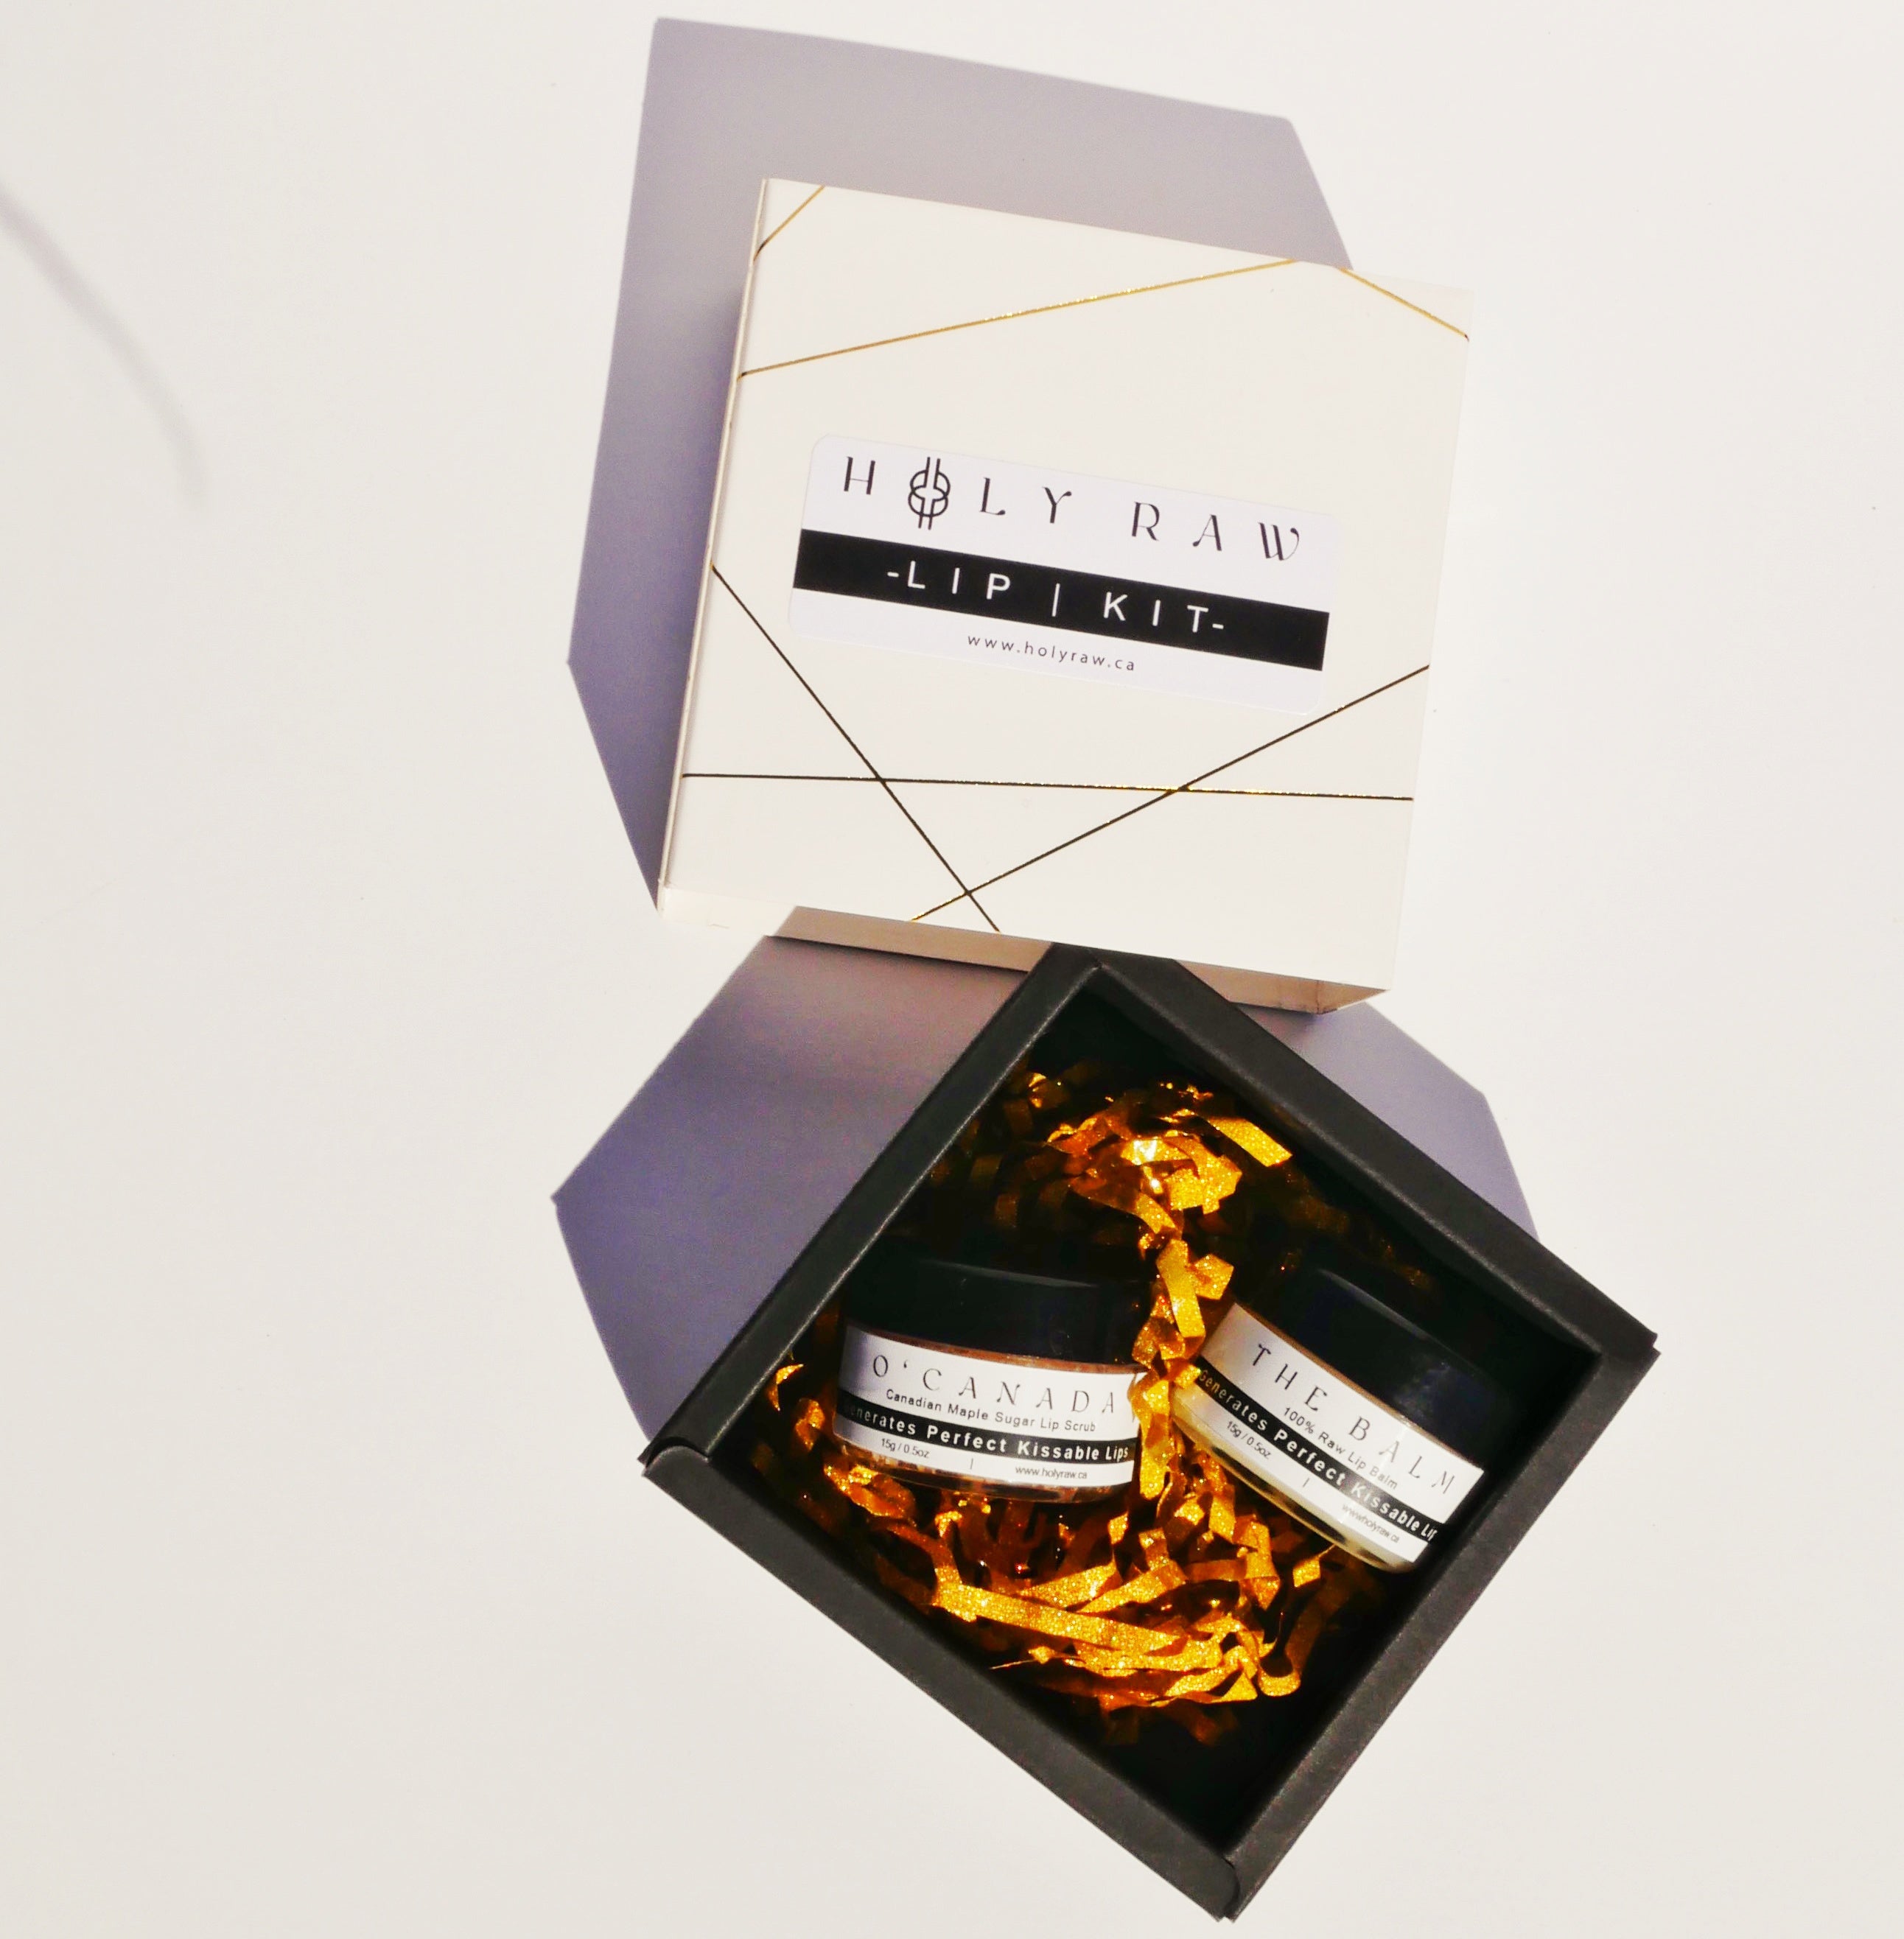 The holy raw lip kit sliding draw box opened displaying its contents which contains both the o'canada maple sugar lip scrub and the balm lip balm surrounded by gold confetti.